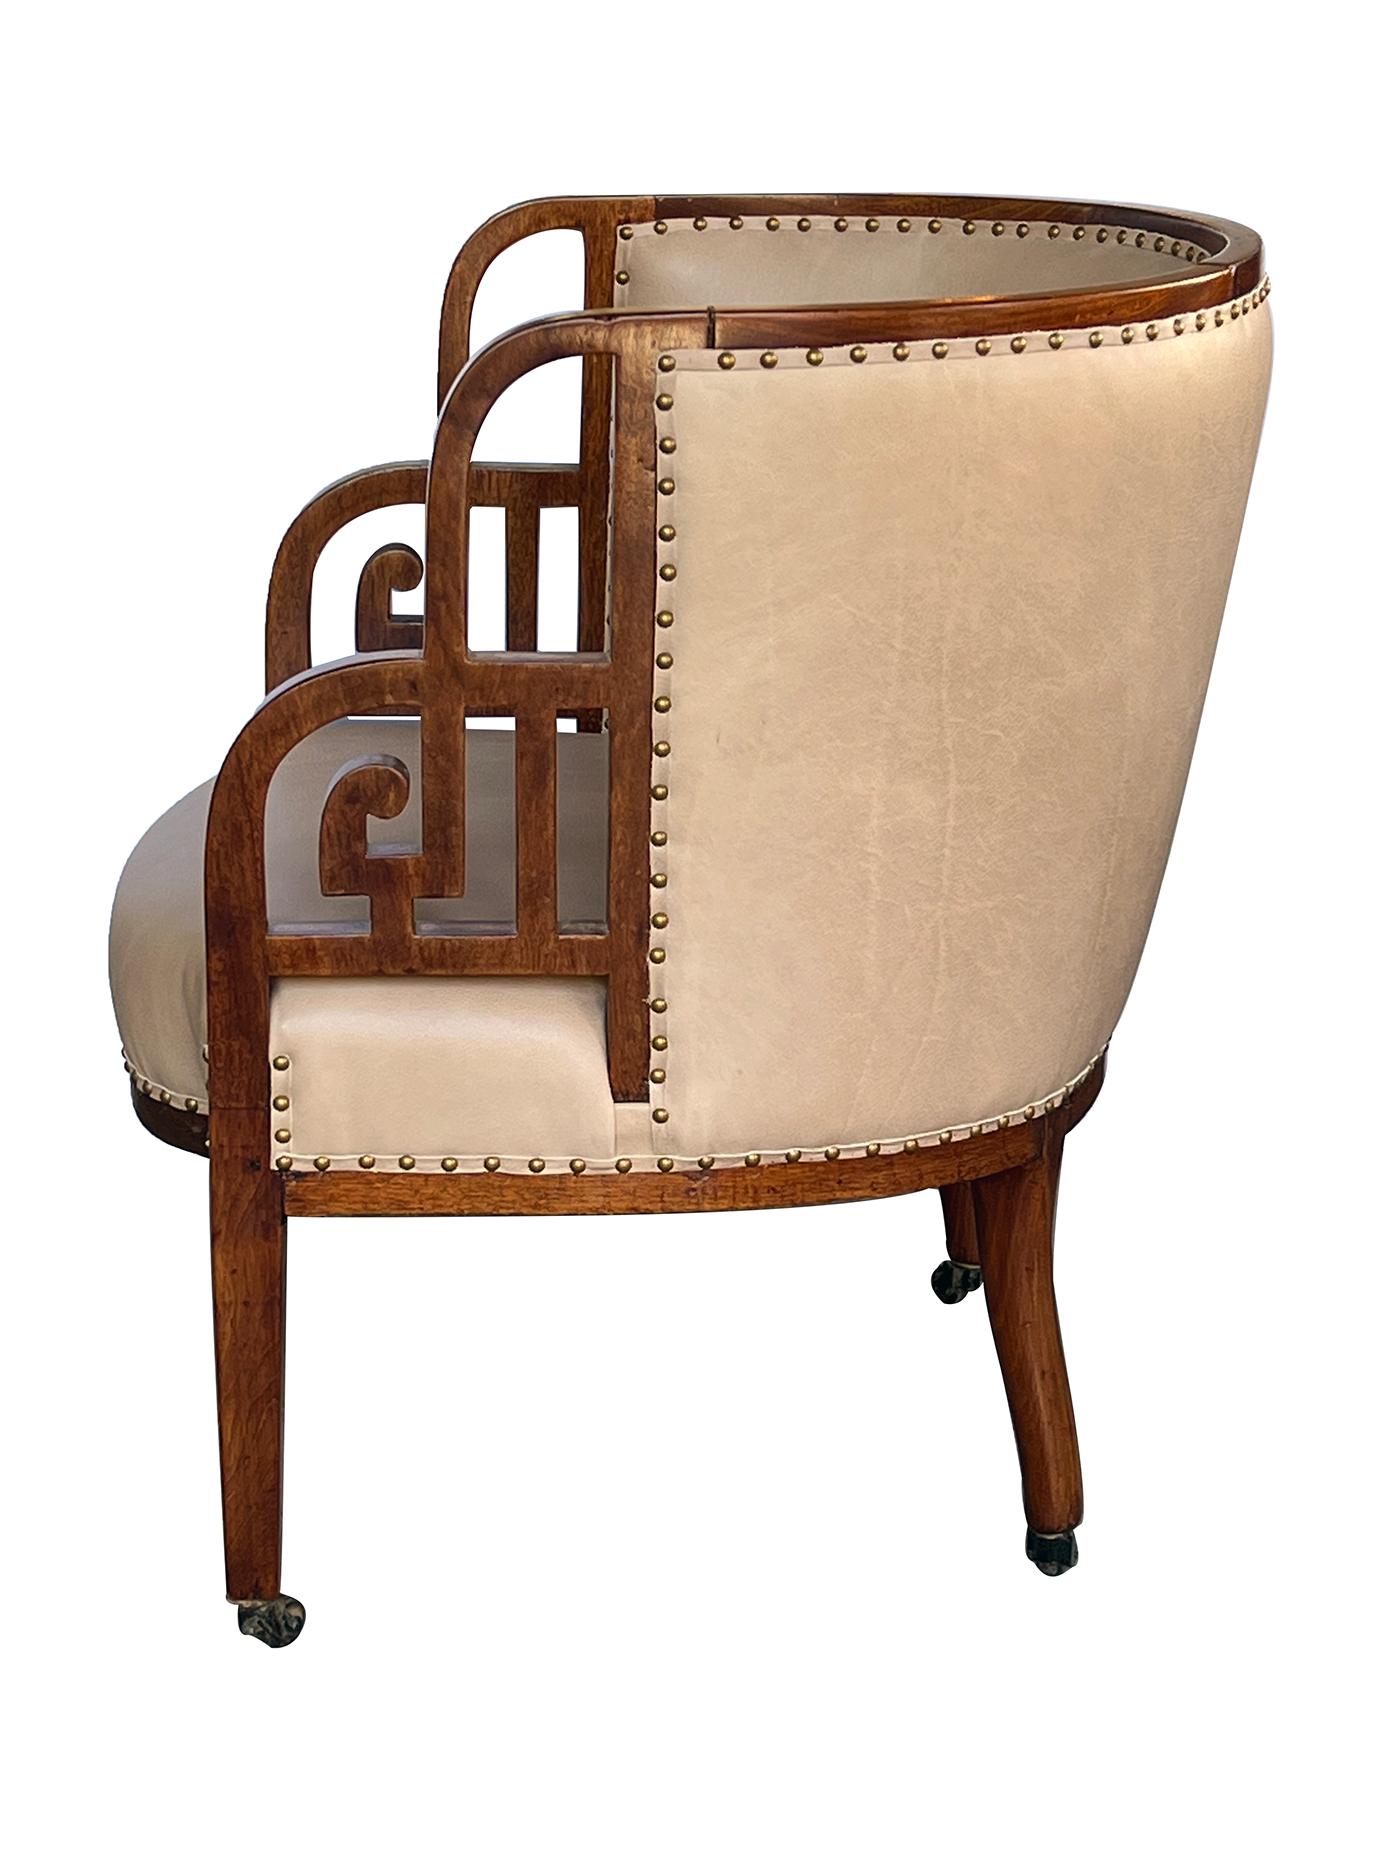 Rare English Art Deco Barrel-Back Chair in the Asian Taste For Sale 2